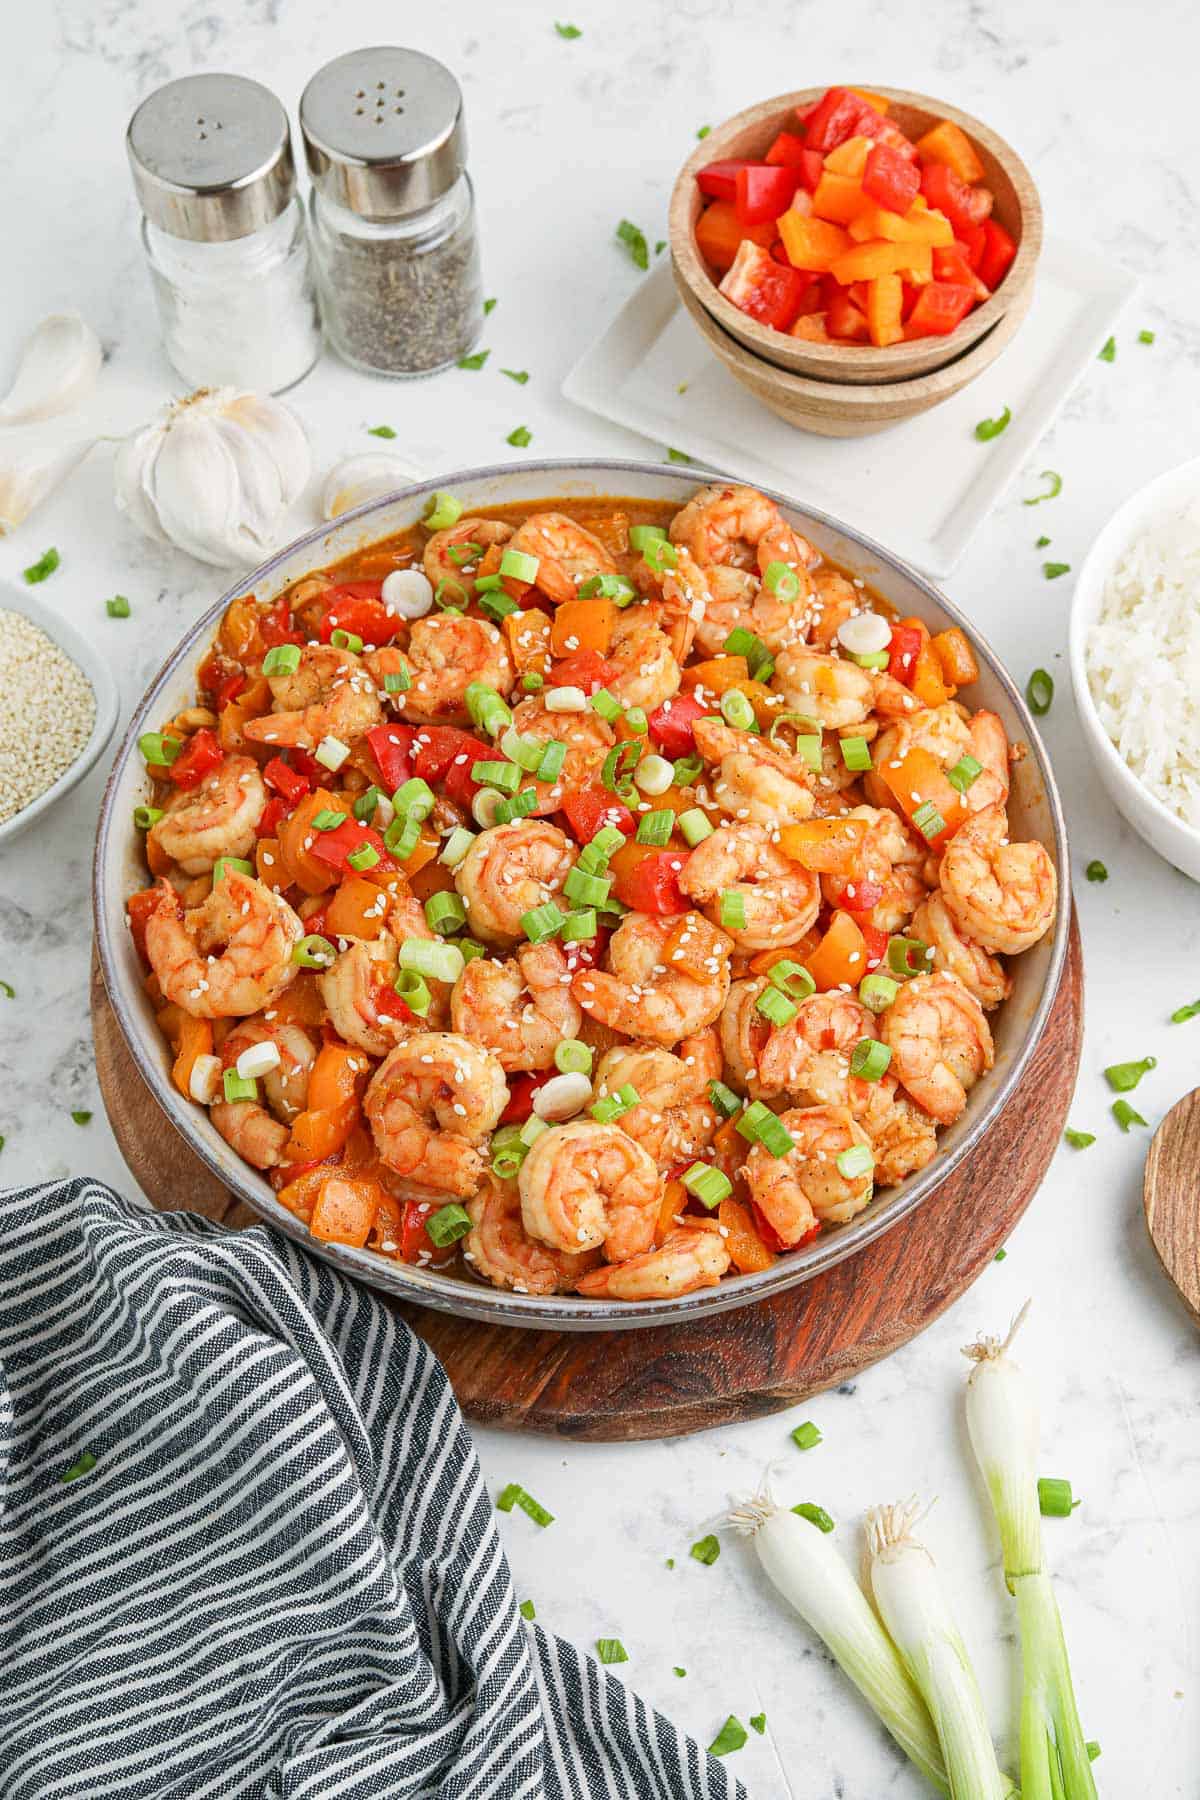 A large bowl of Kung Pao Shrimp surrounded by other ingredients and a striped towel.